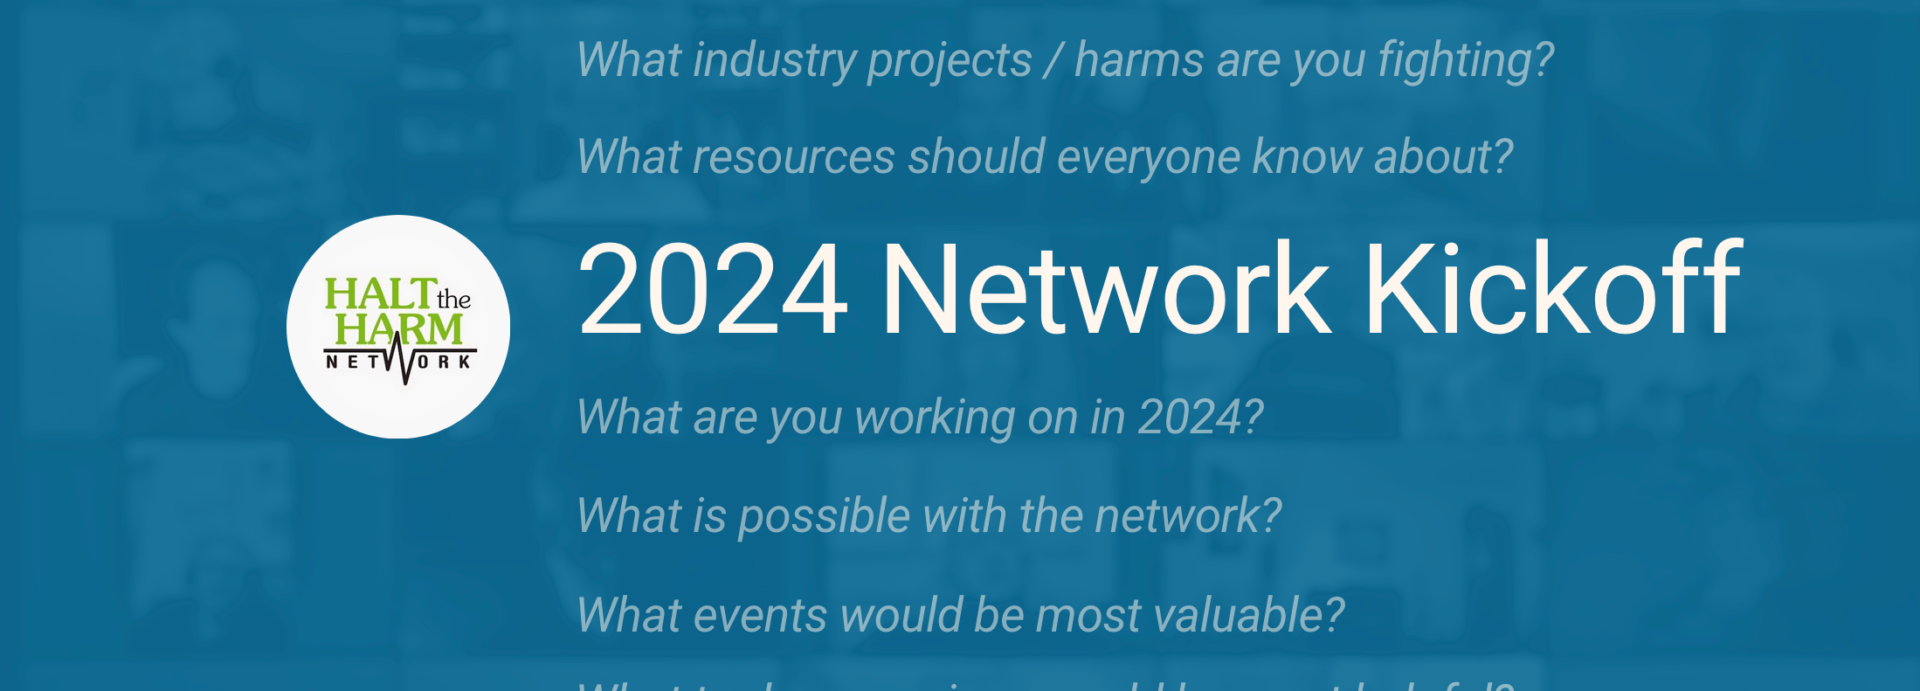 Cover image for 2024 Network Kickoff event